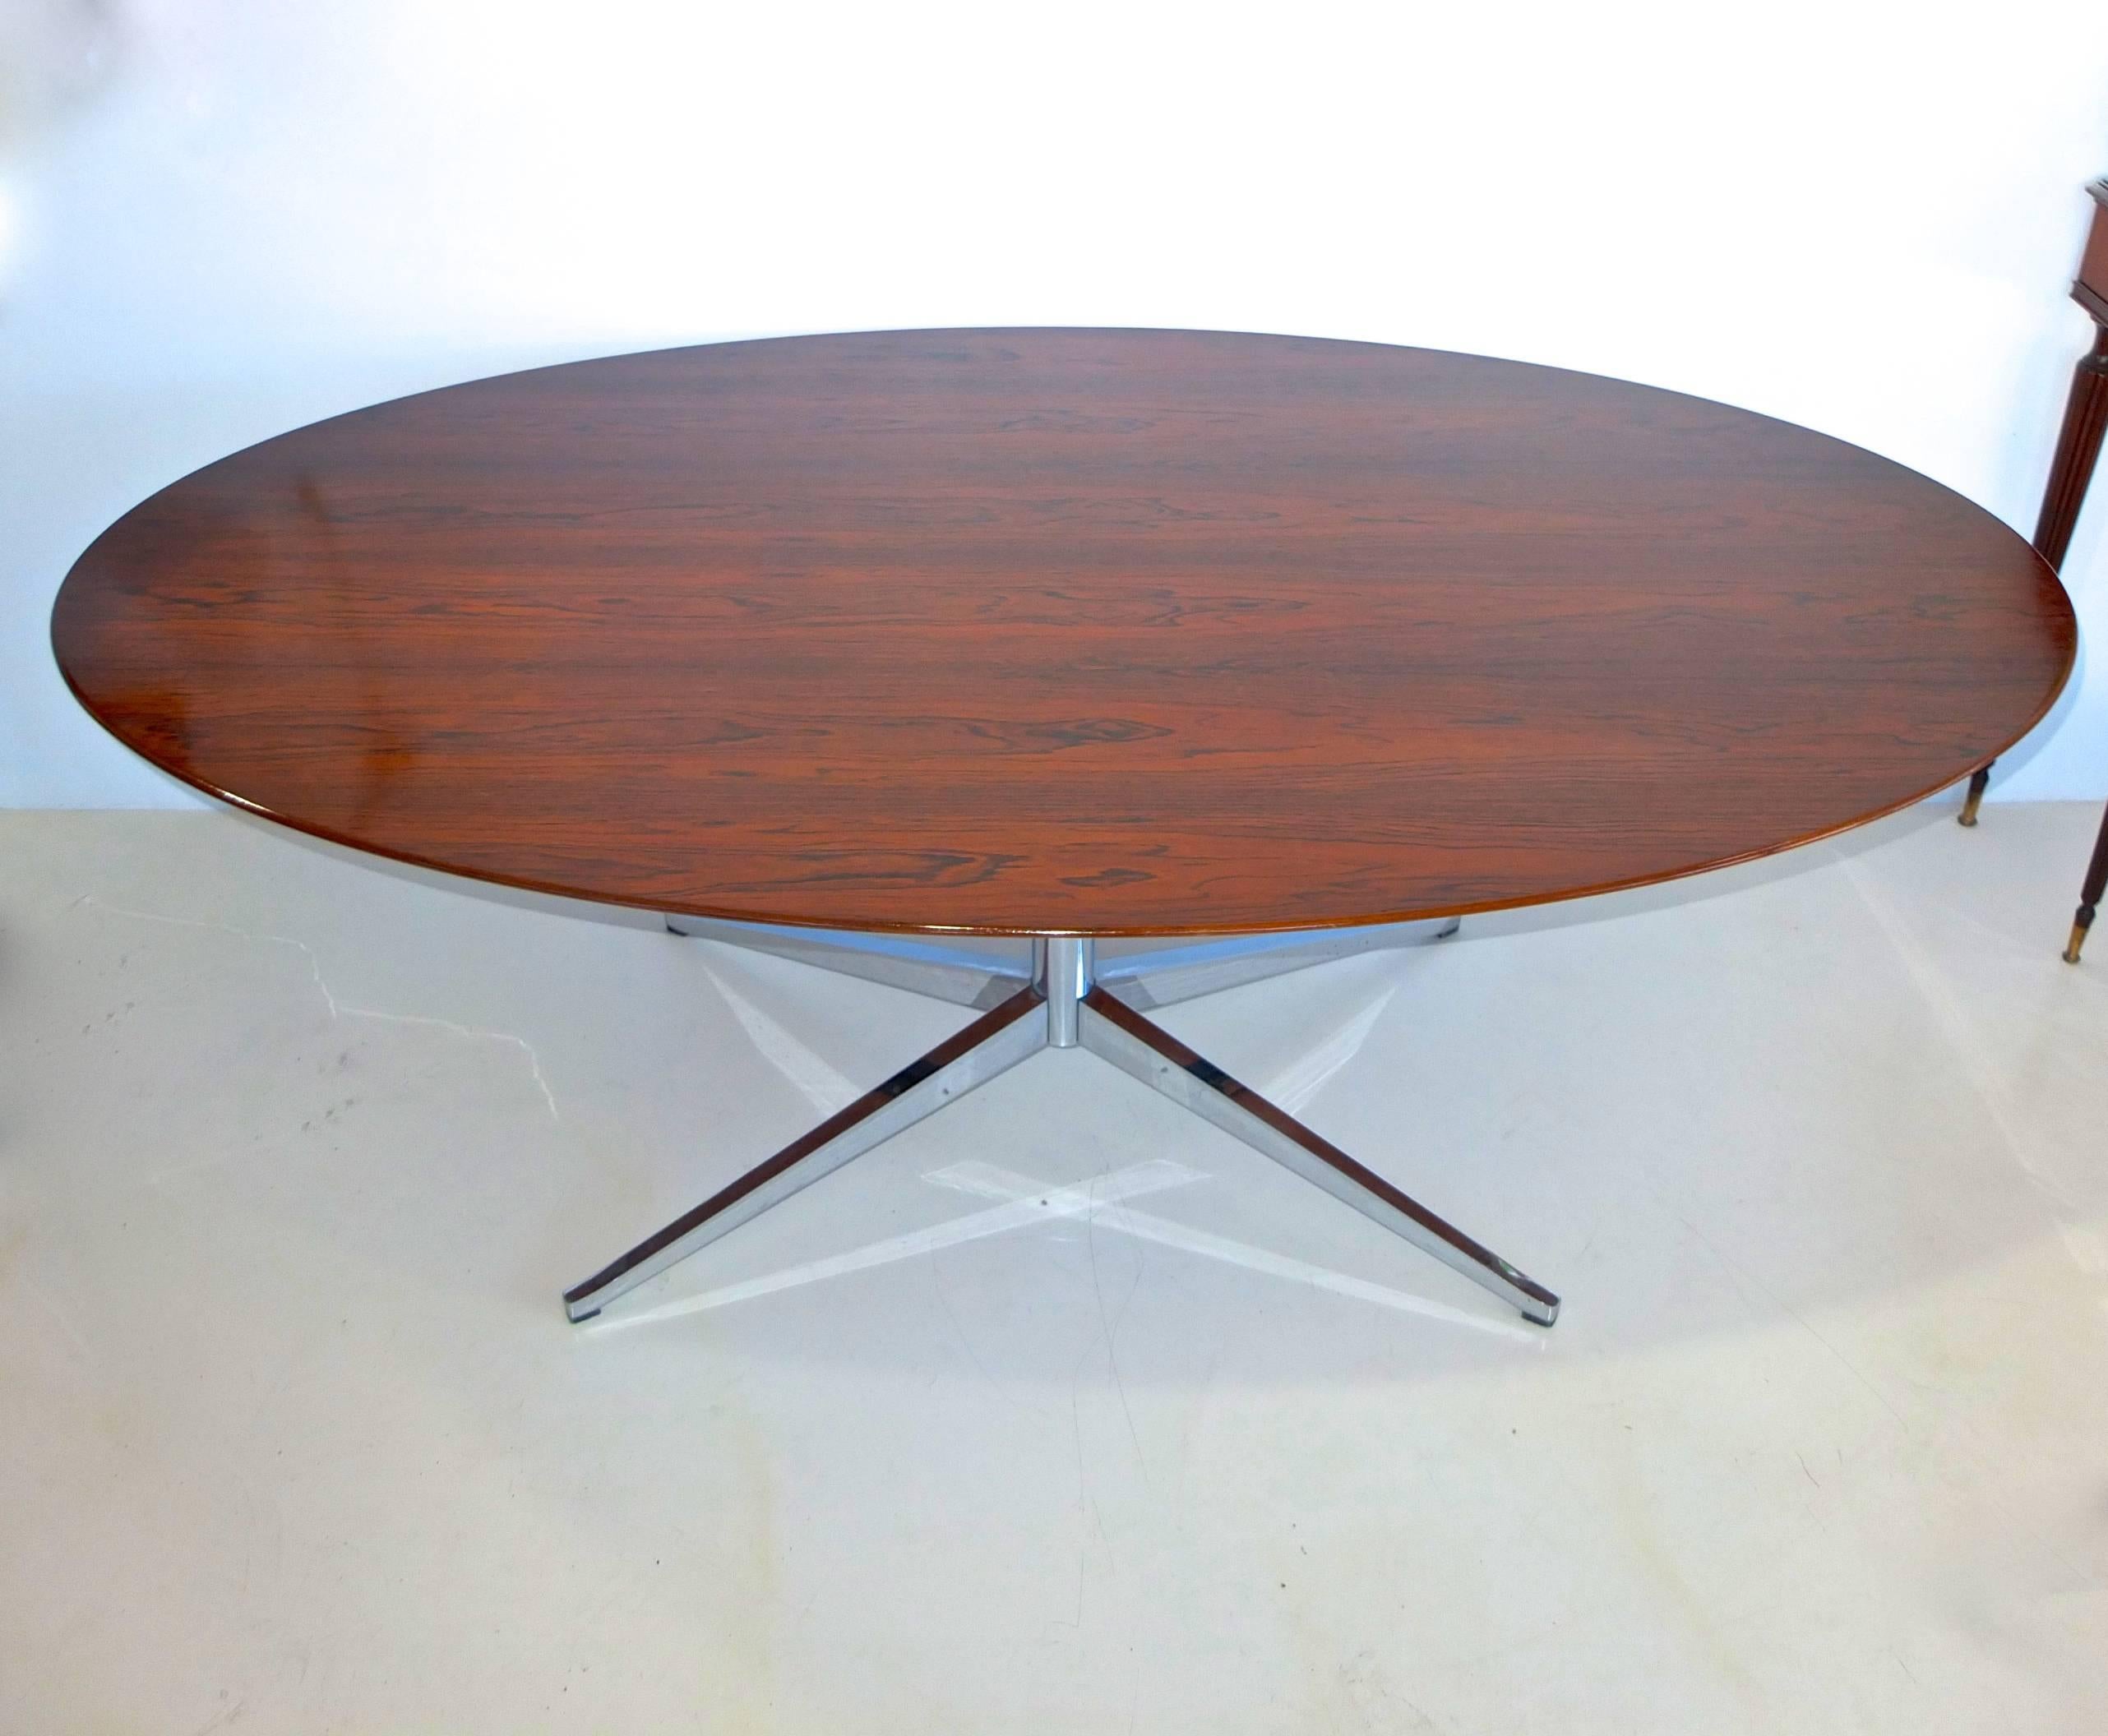 Mid-20th Century Brazilian Rosewood Elliptical Oval Executive Table Desk by Florence Knoll